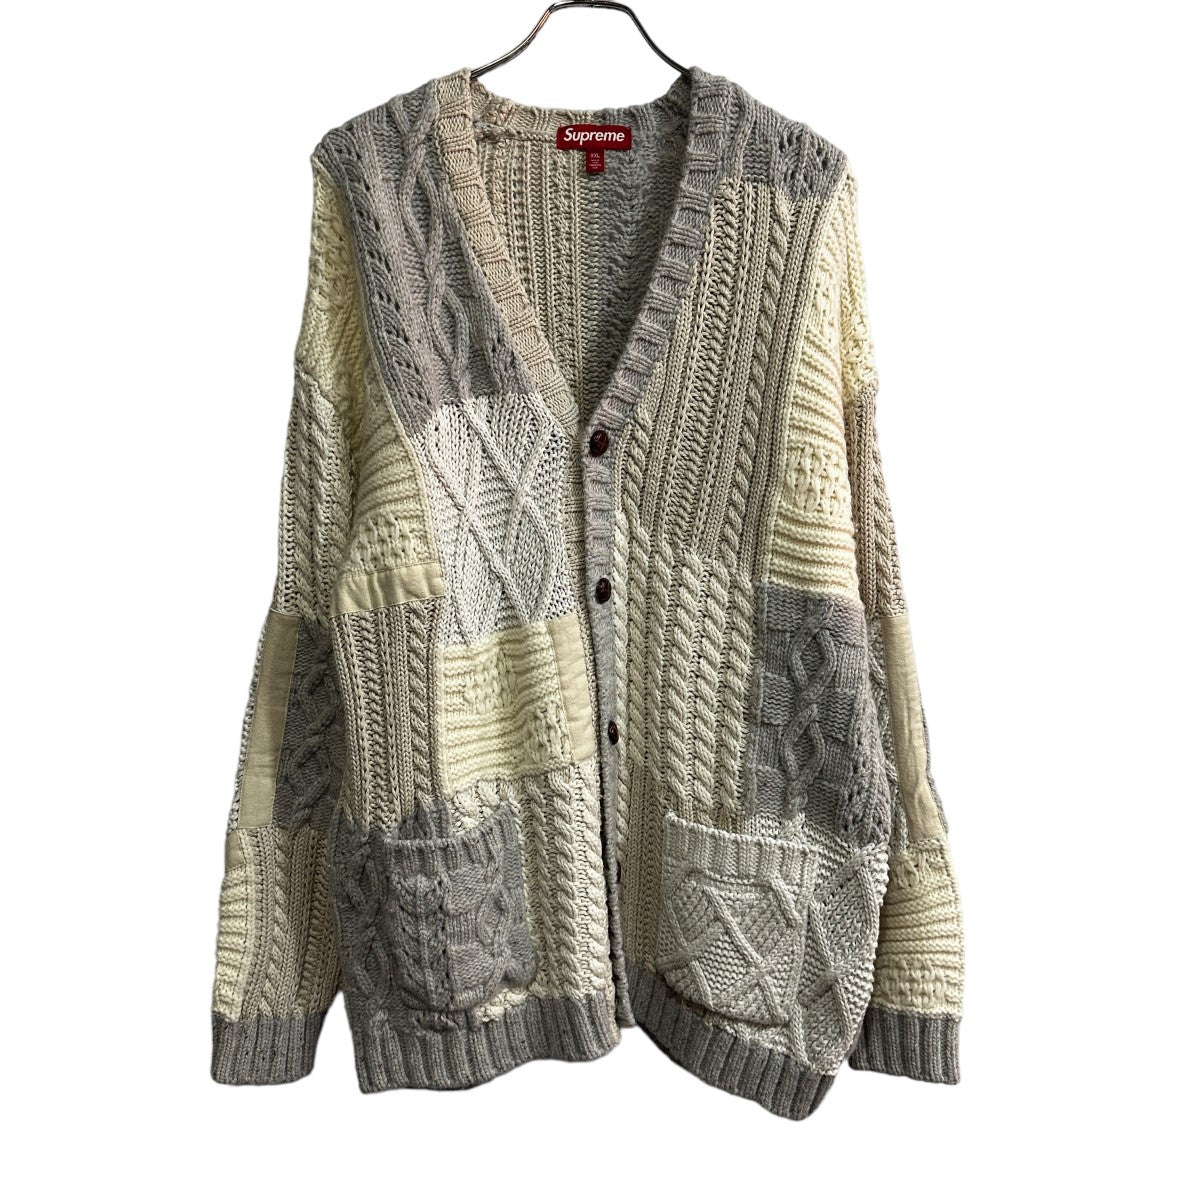 Supreme Patchwork Cable Knit Cardigan袖丈長袖